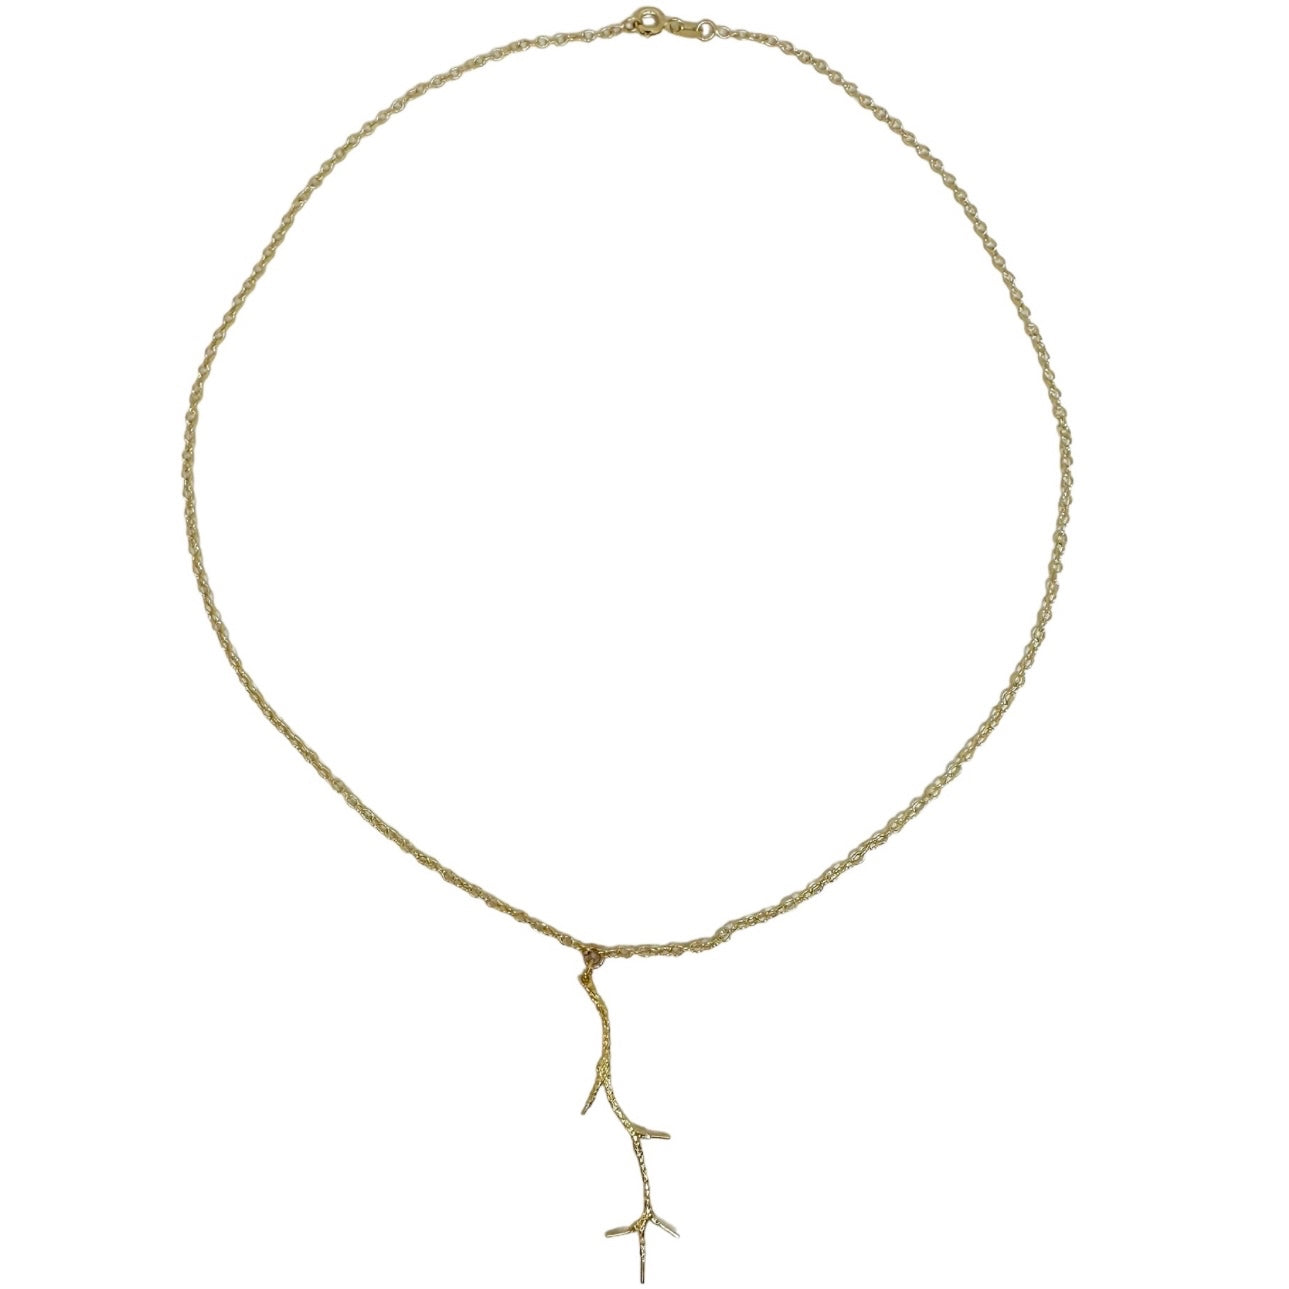 Mounted necklace with branch